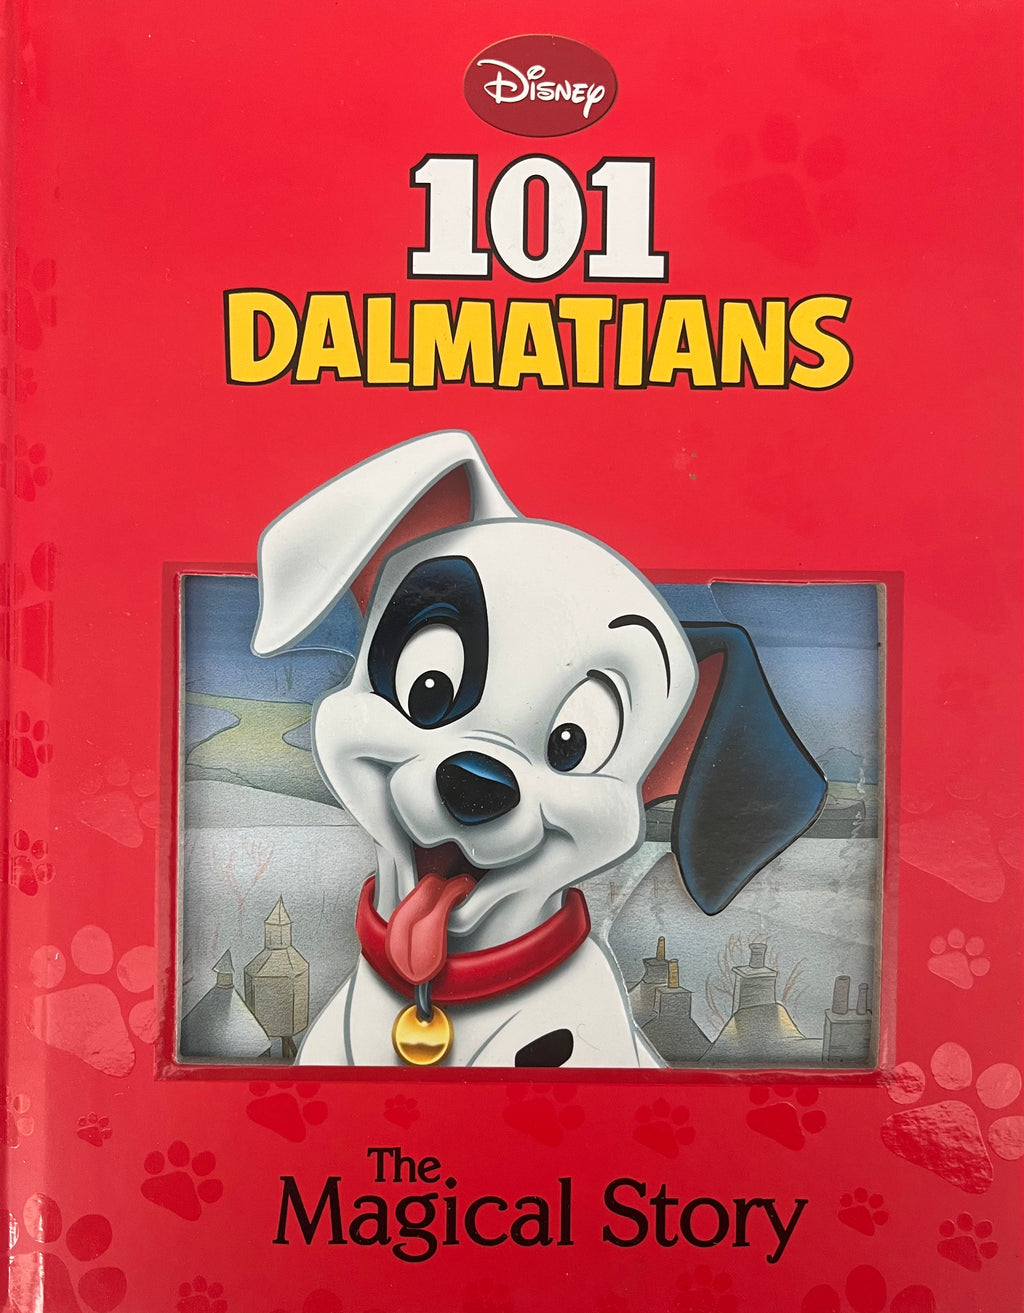 Disney 101 dalmations: The magical story